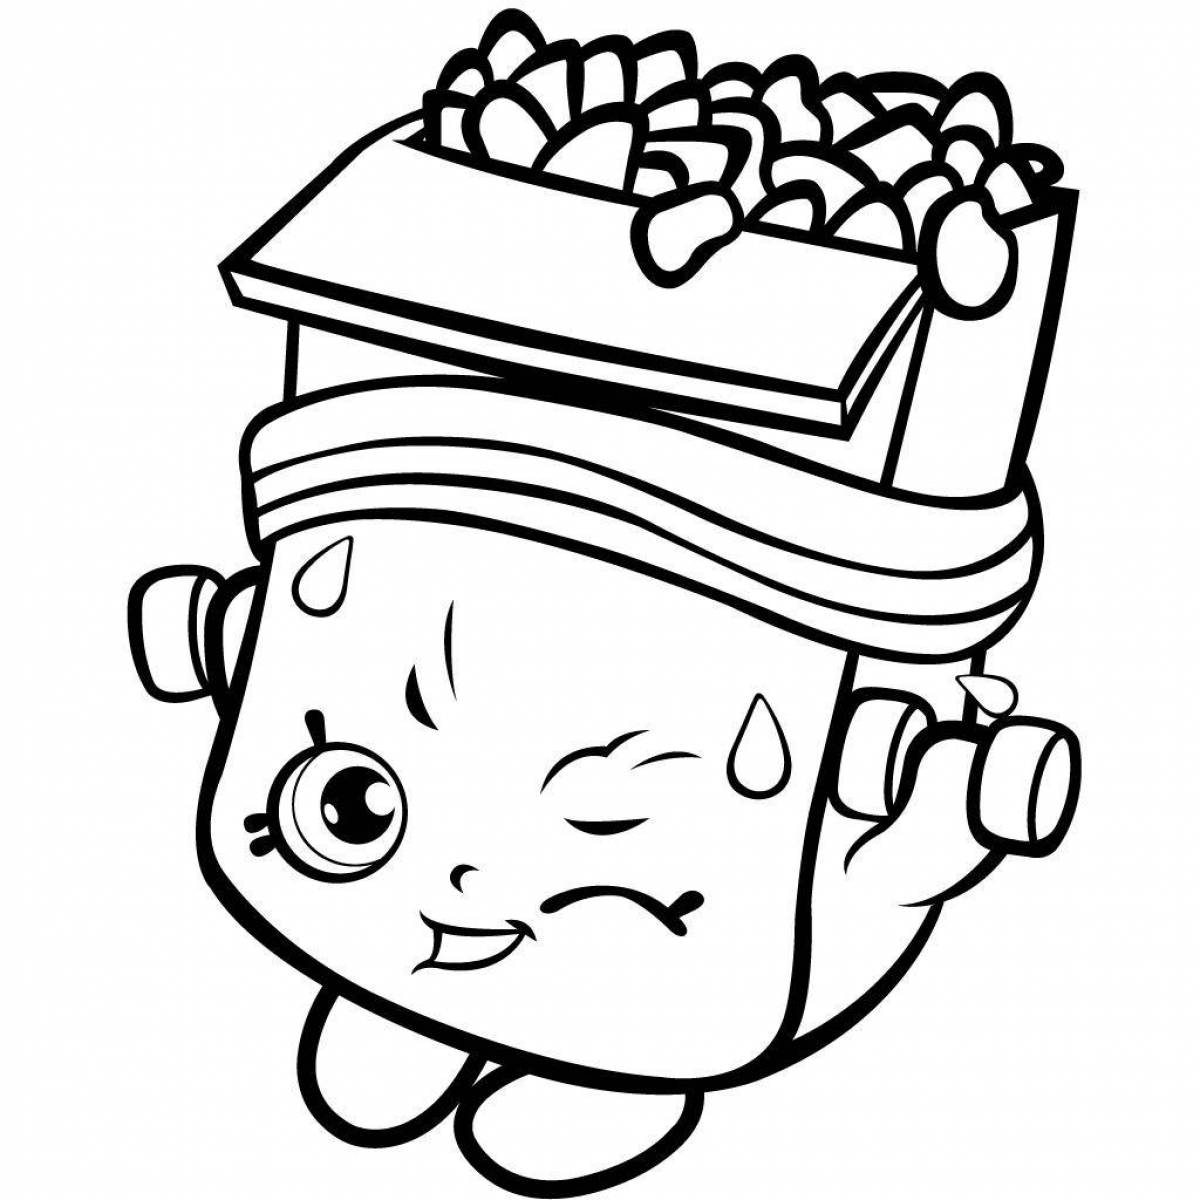 Charming apple shopkins coloring book